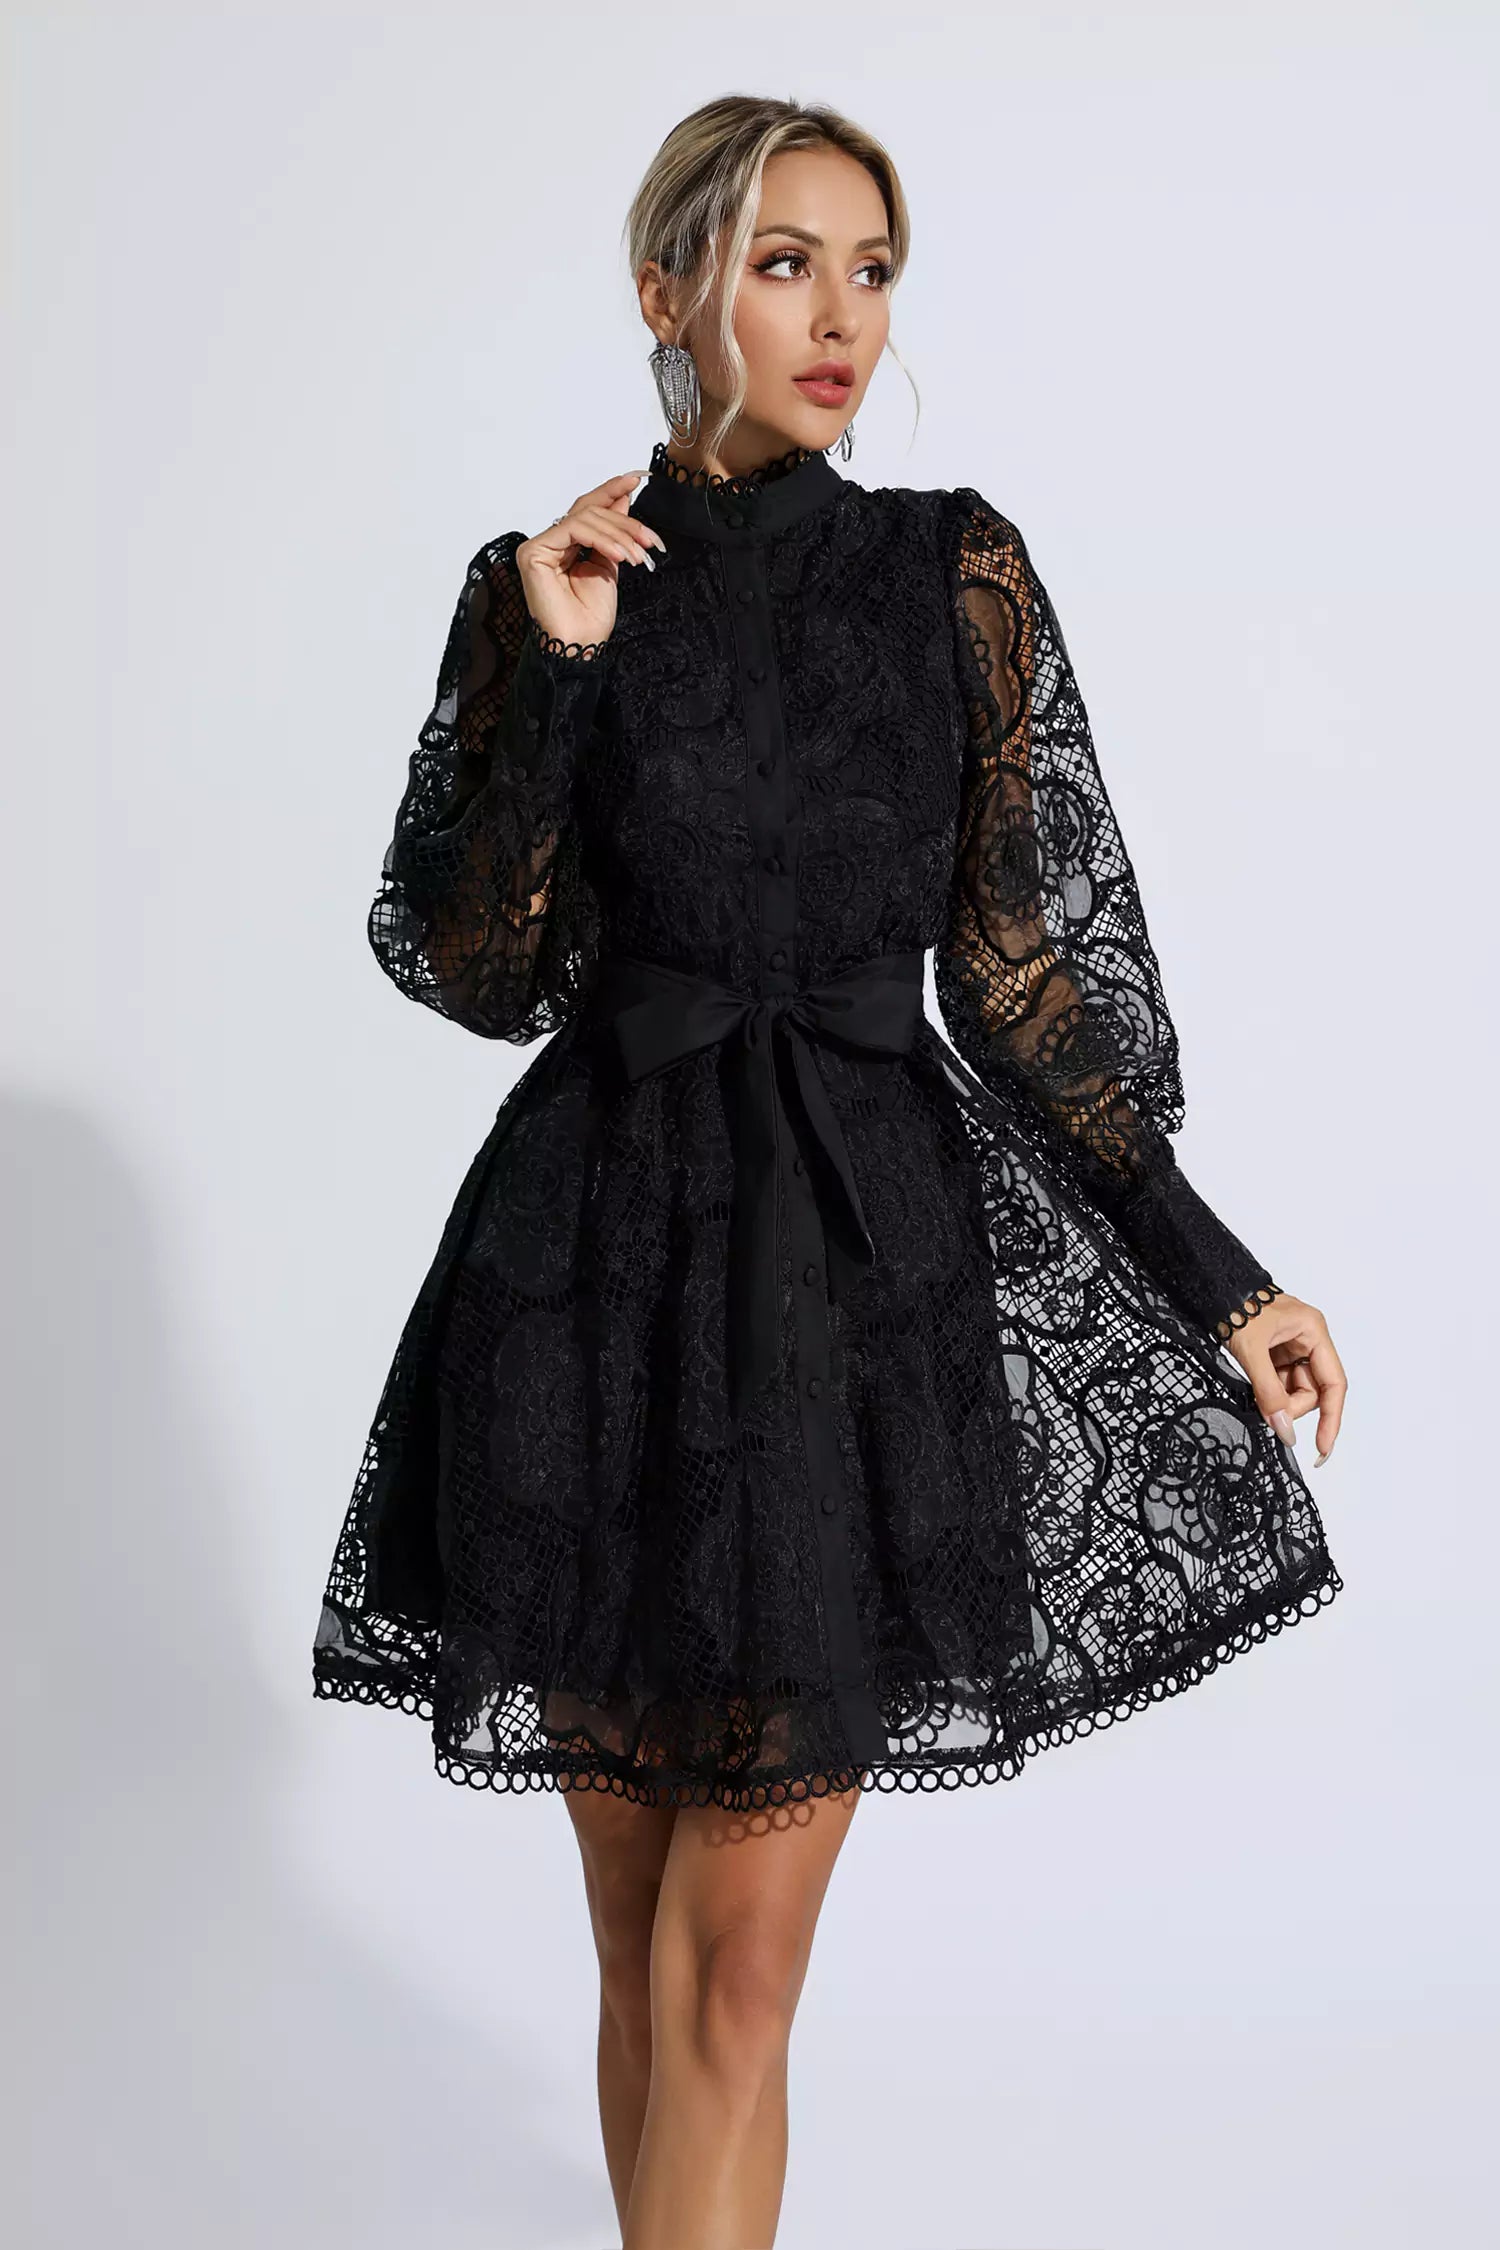 Lace Dresses  Shop Formal, Bridal, and Evening Gowns – CATCHALL